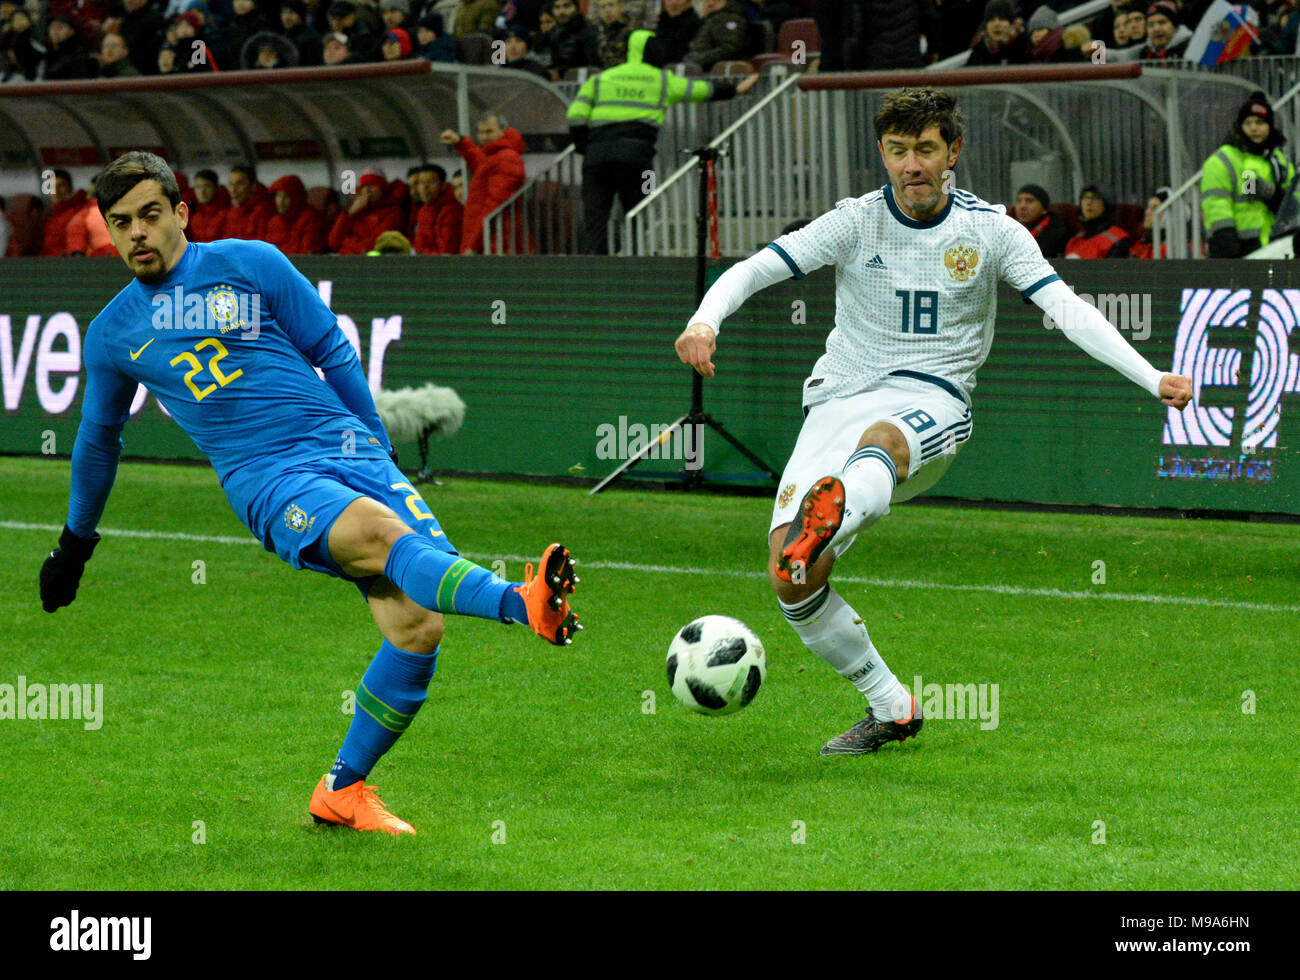 Moscow, Russia - March 23, 2018. Russian left winger Yuri Zhirkov against Brazilian rightback Fagner during international test match Russia vs Brazil in Moscow. Credit: Alizada Studios/Alamy Live News Stock Photo